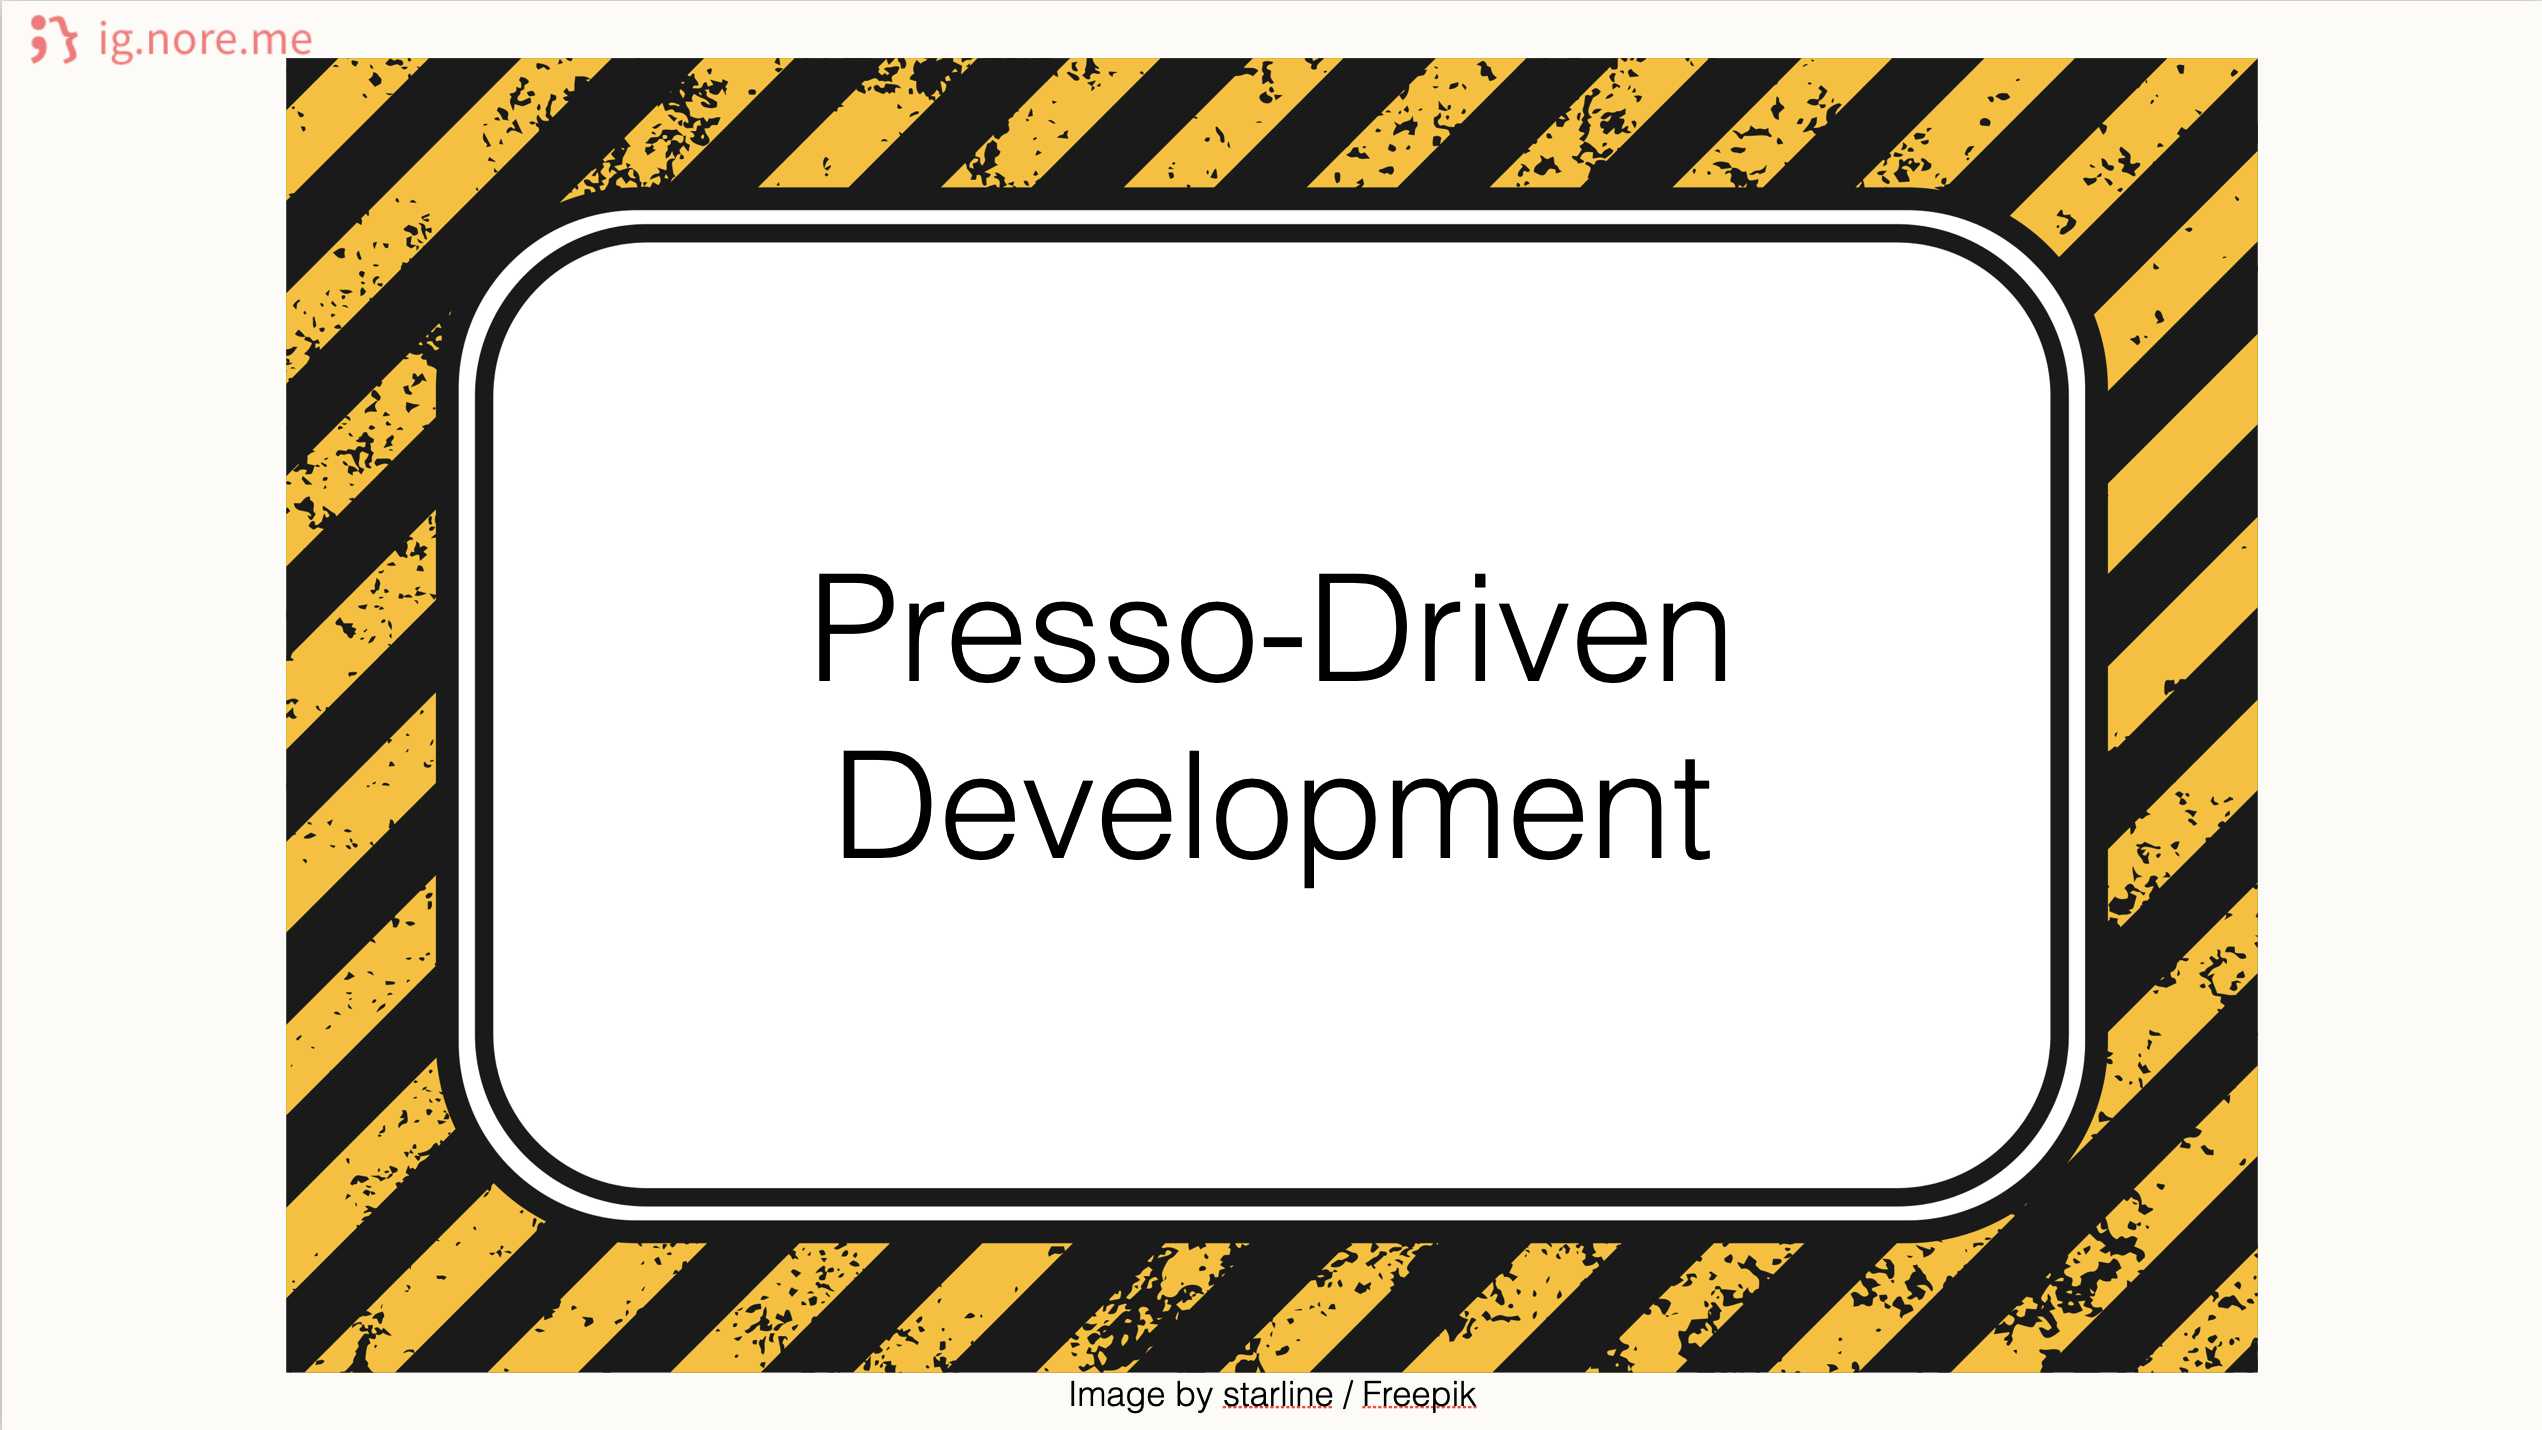 A slide depicted as a warning sign with the text Presso-Driven Development